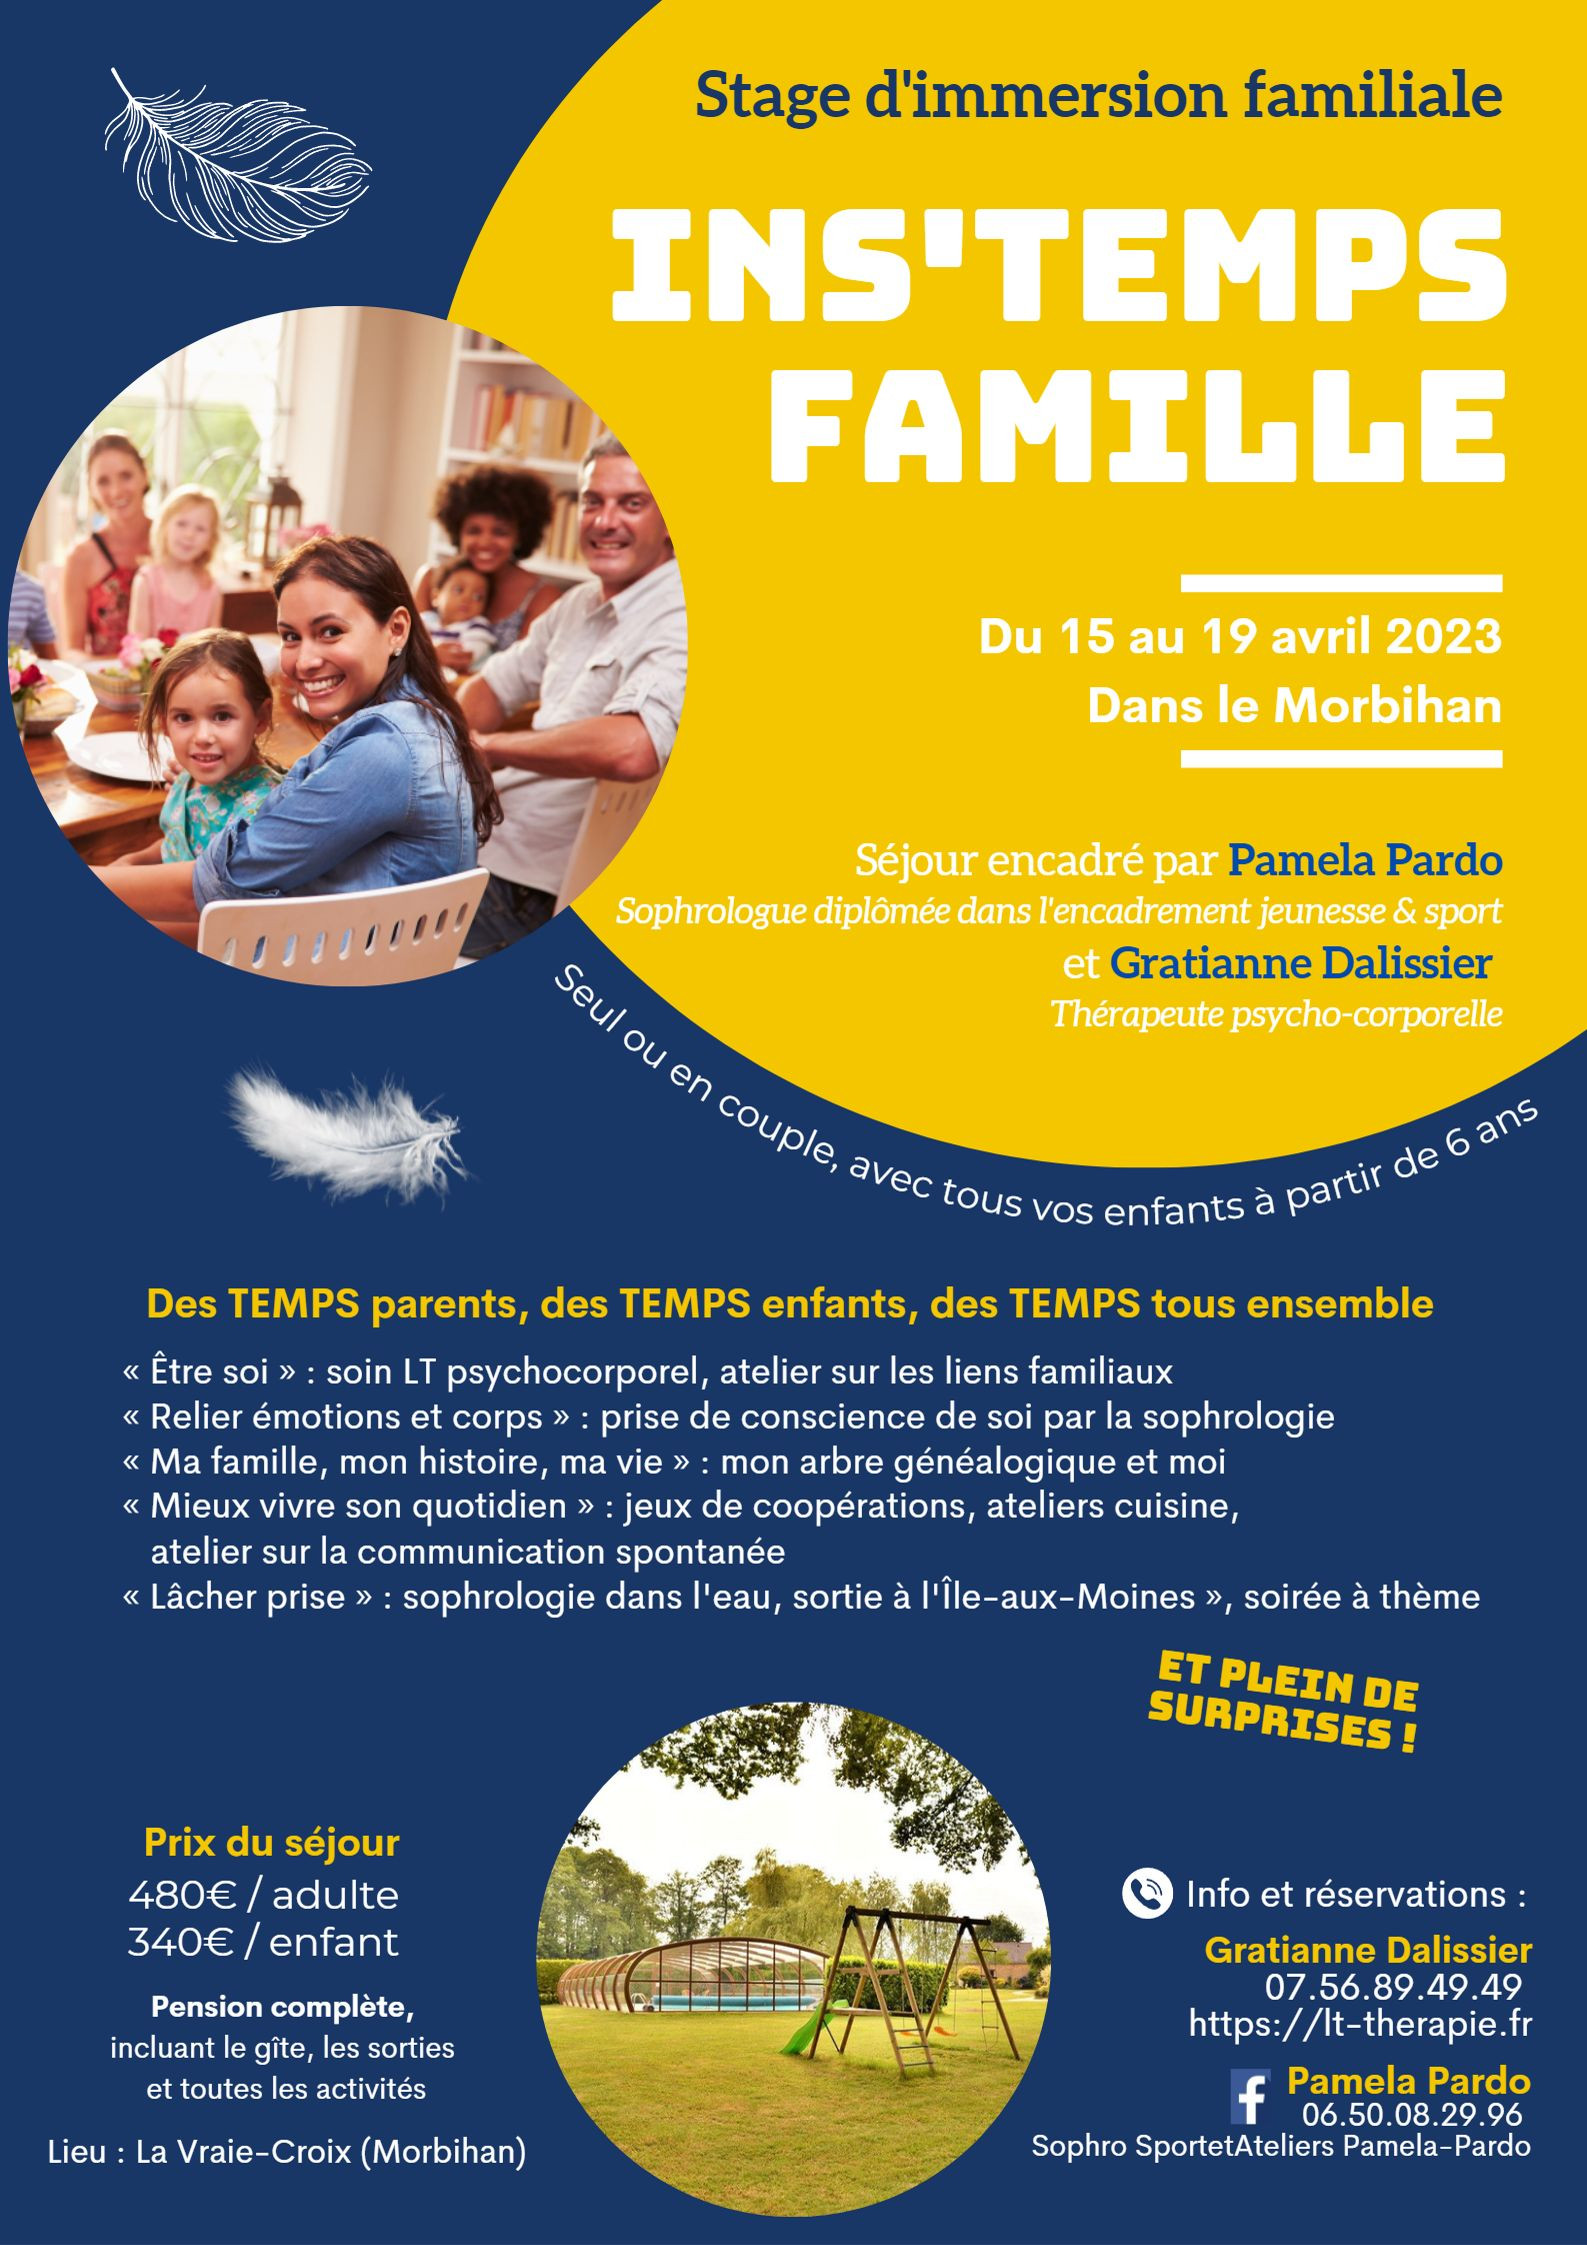 Stage d'immersion familiale 15-19 avril 2023